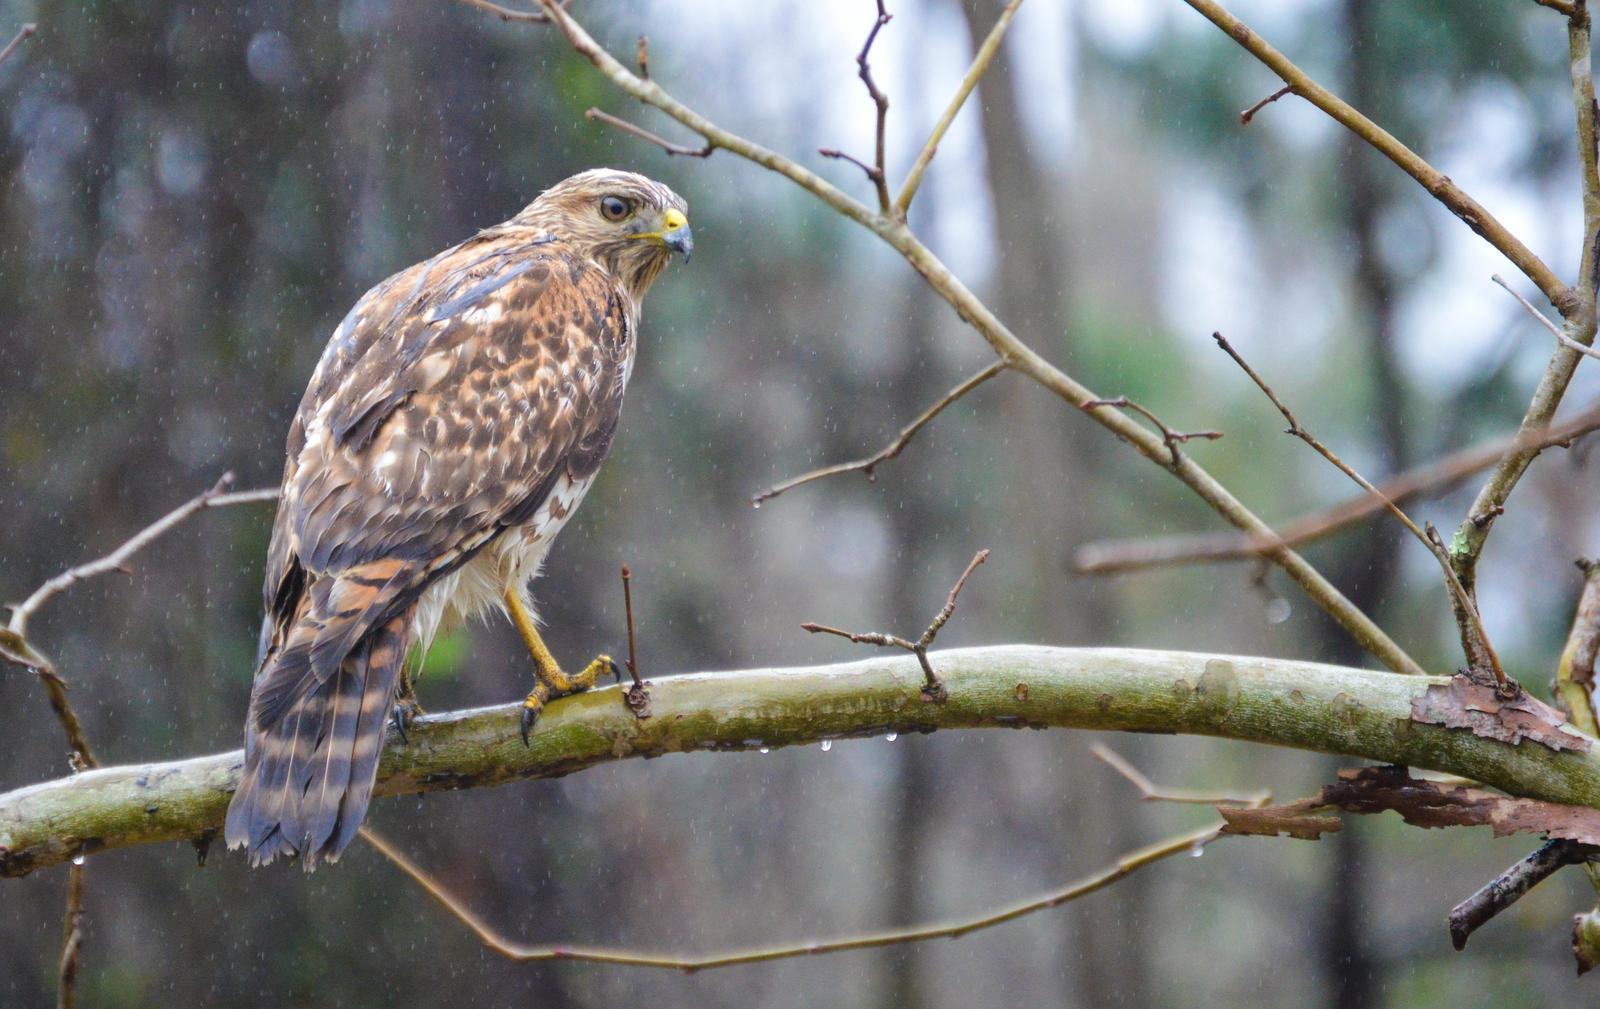 Red-shouldered Hawk Photo by Mike Ballentine